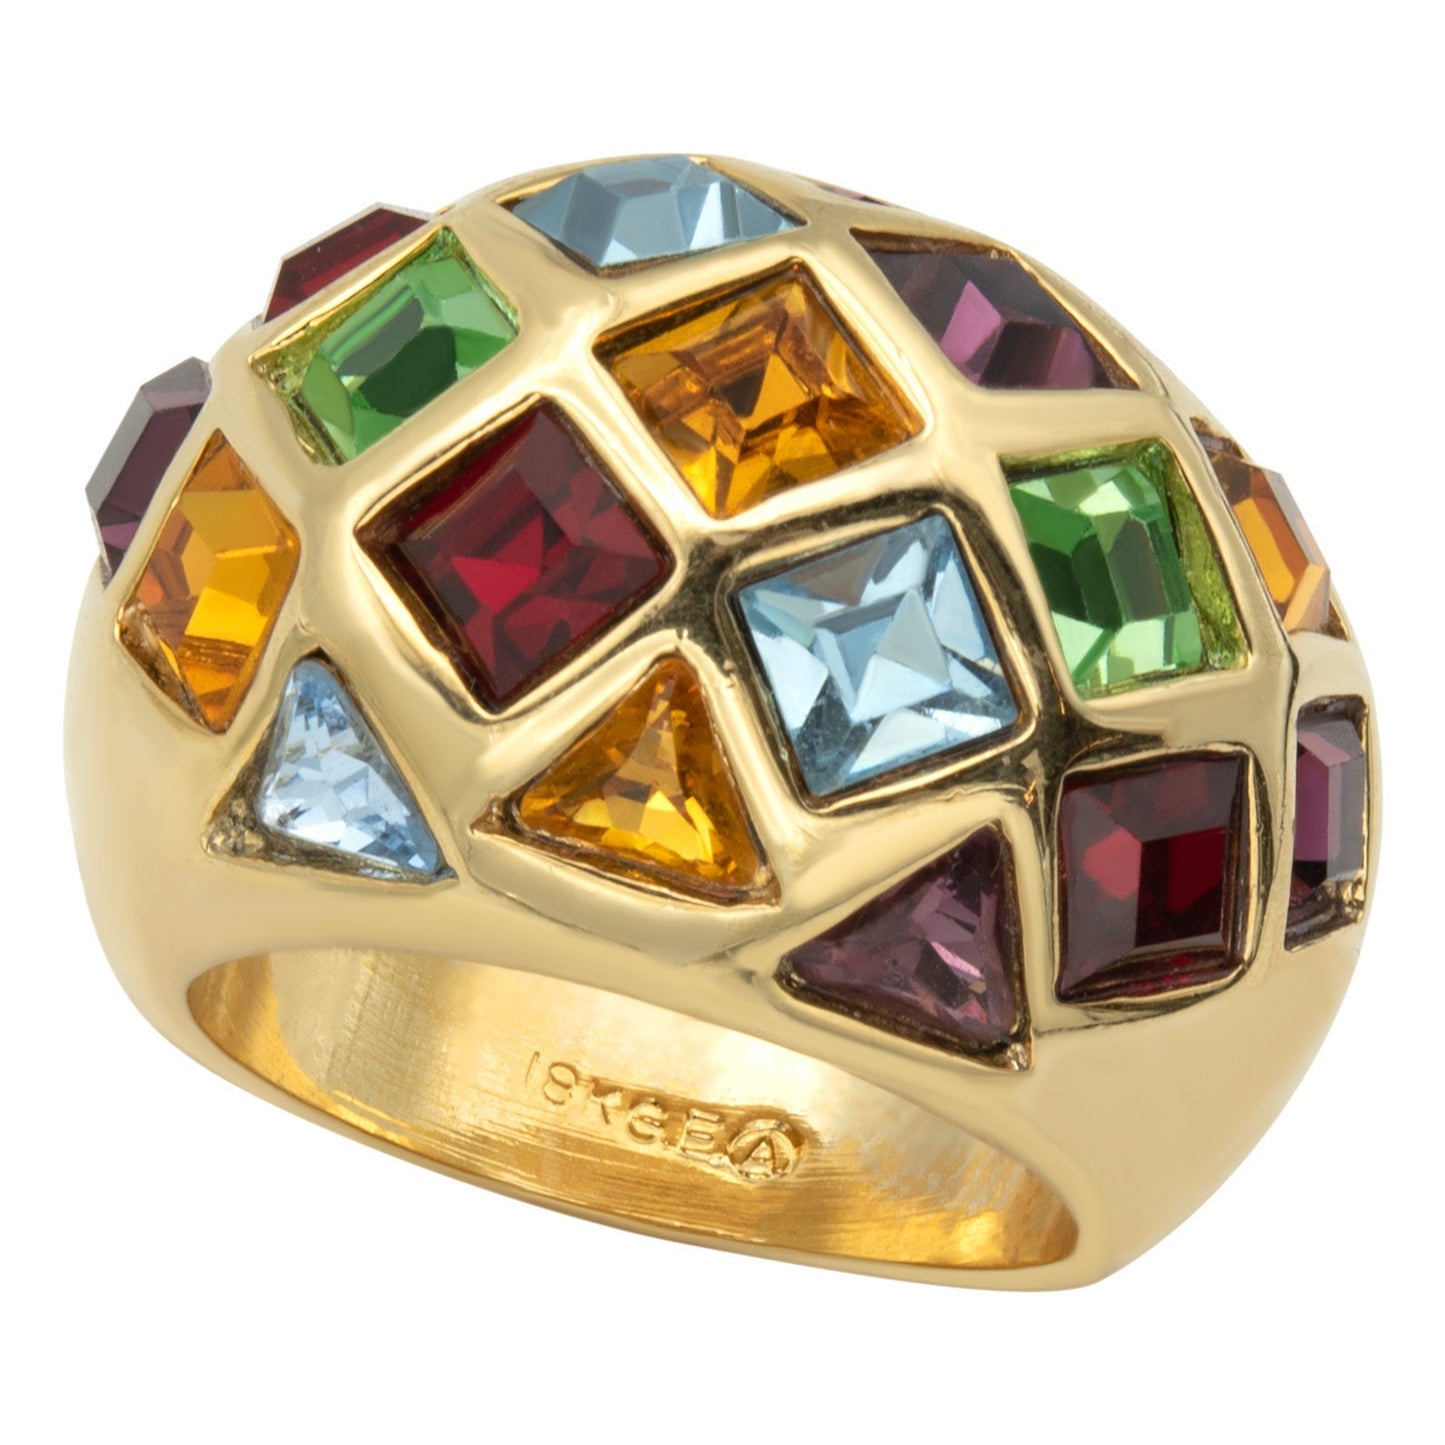 Vintage Ring Multi Colored Rainbow Style Austrian Crystals 18k Gold 1970s Era Antique for Women #R4012